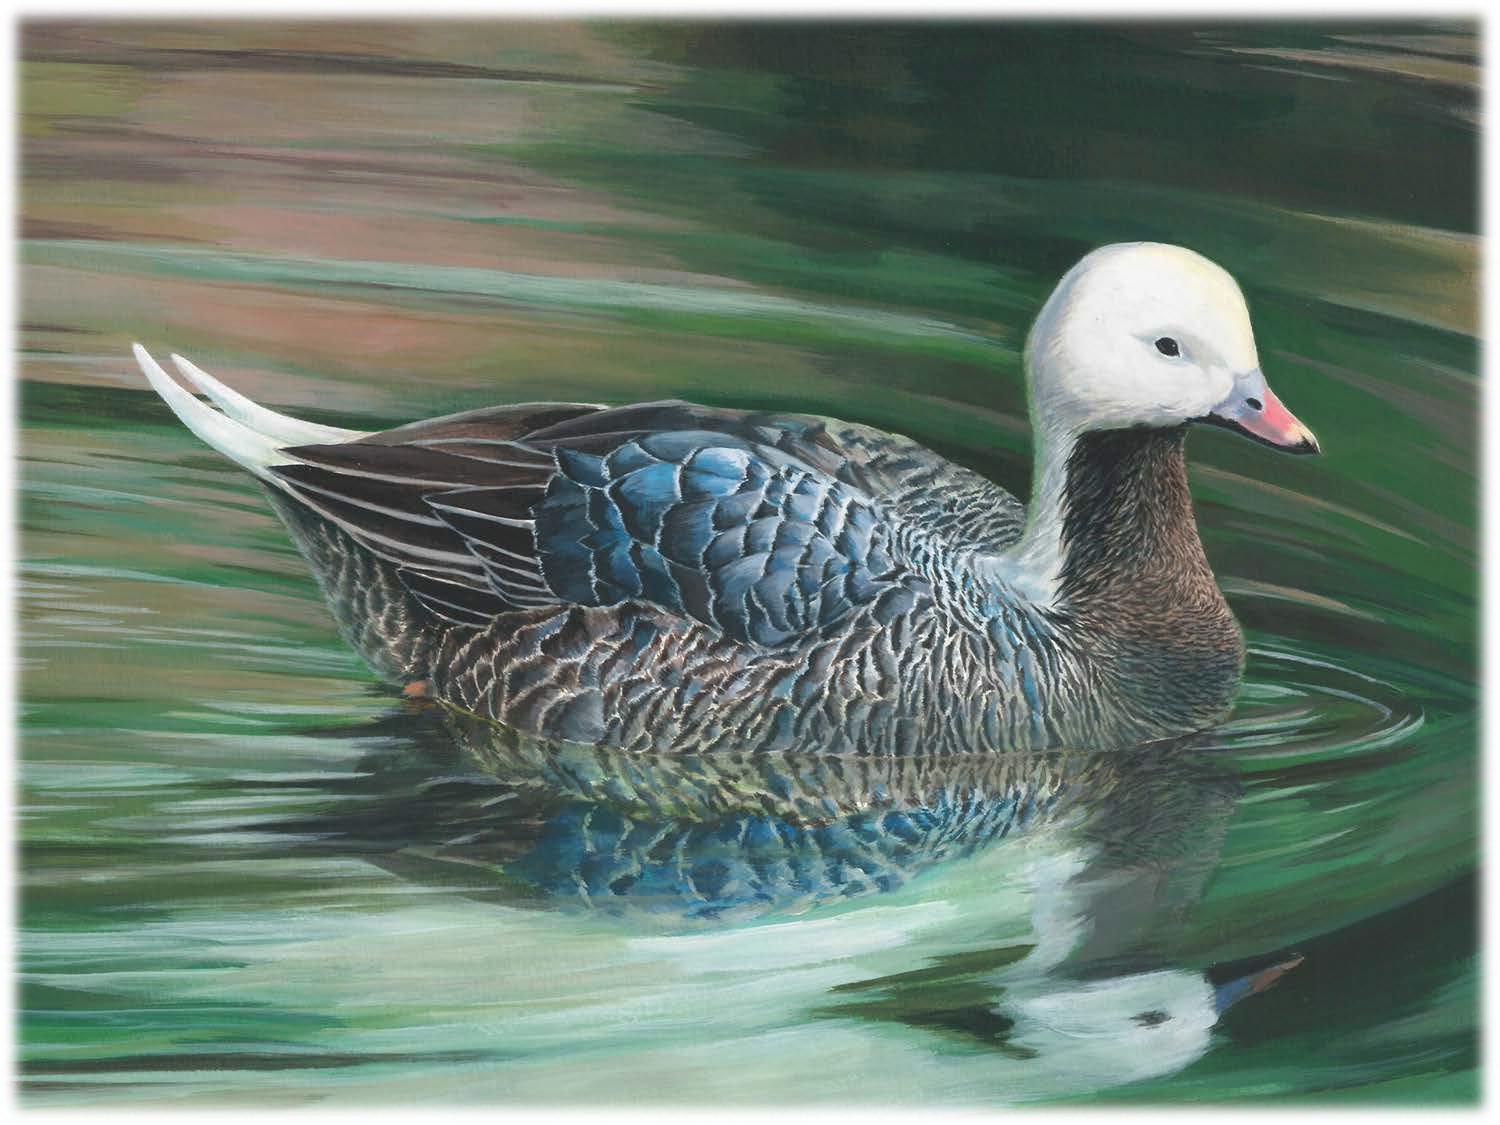 Here's the winning 2018 Junior Duck Stamp art, an acrylic painting of an emperor goose by Rayen Kang. Image courtesy of the USFWS